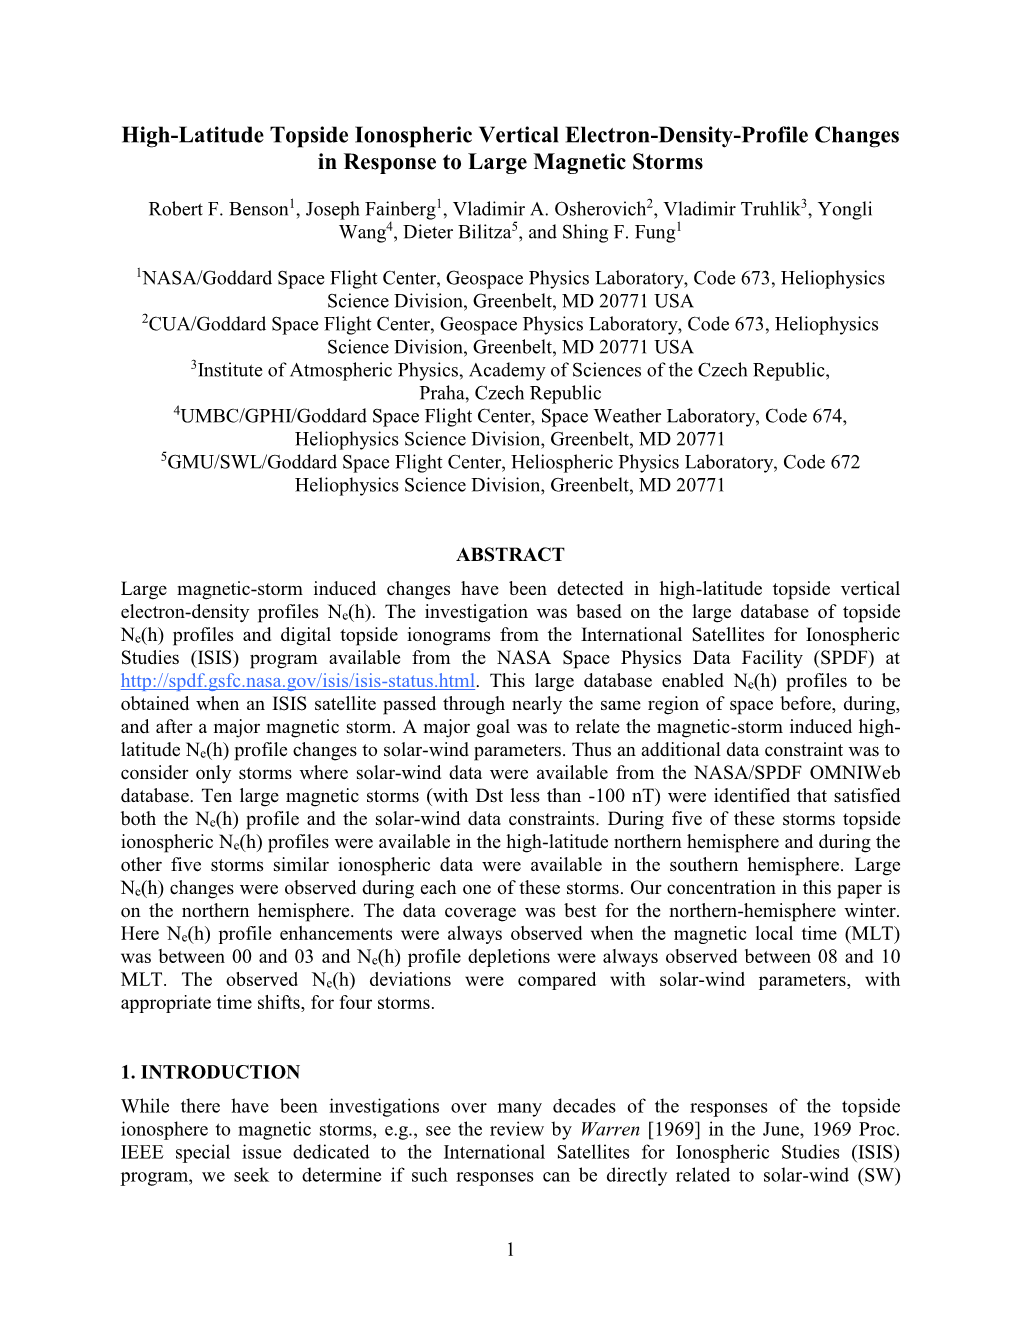 High-Latitude Topside Ionospheric Vertical Electron-Density-Profile Changes in Response to Large Magnetic Storms